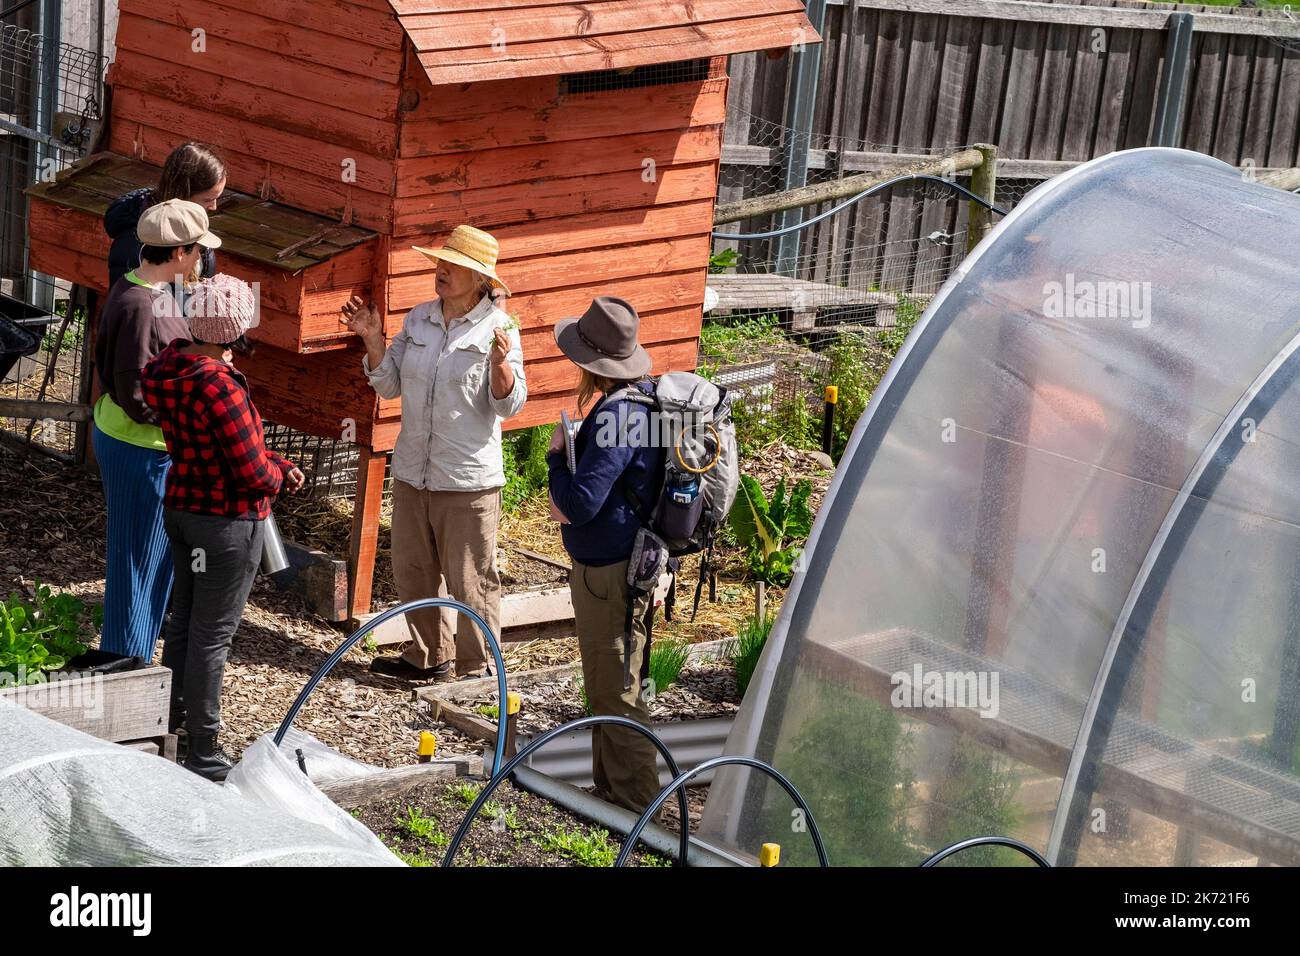 A group of permaculture students attending a composting workshop on a small urban farm in the suburbs of Hobart, Tasmania Stock Photo